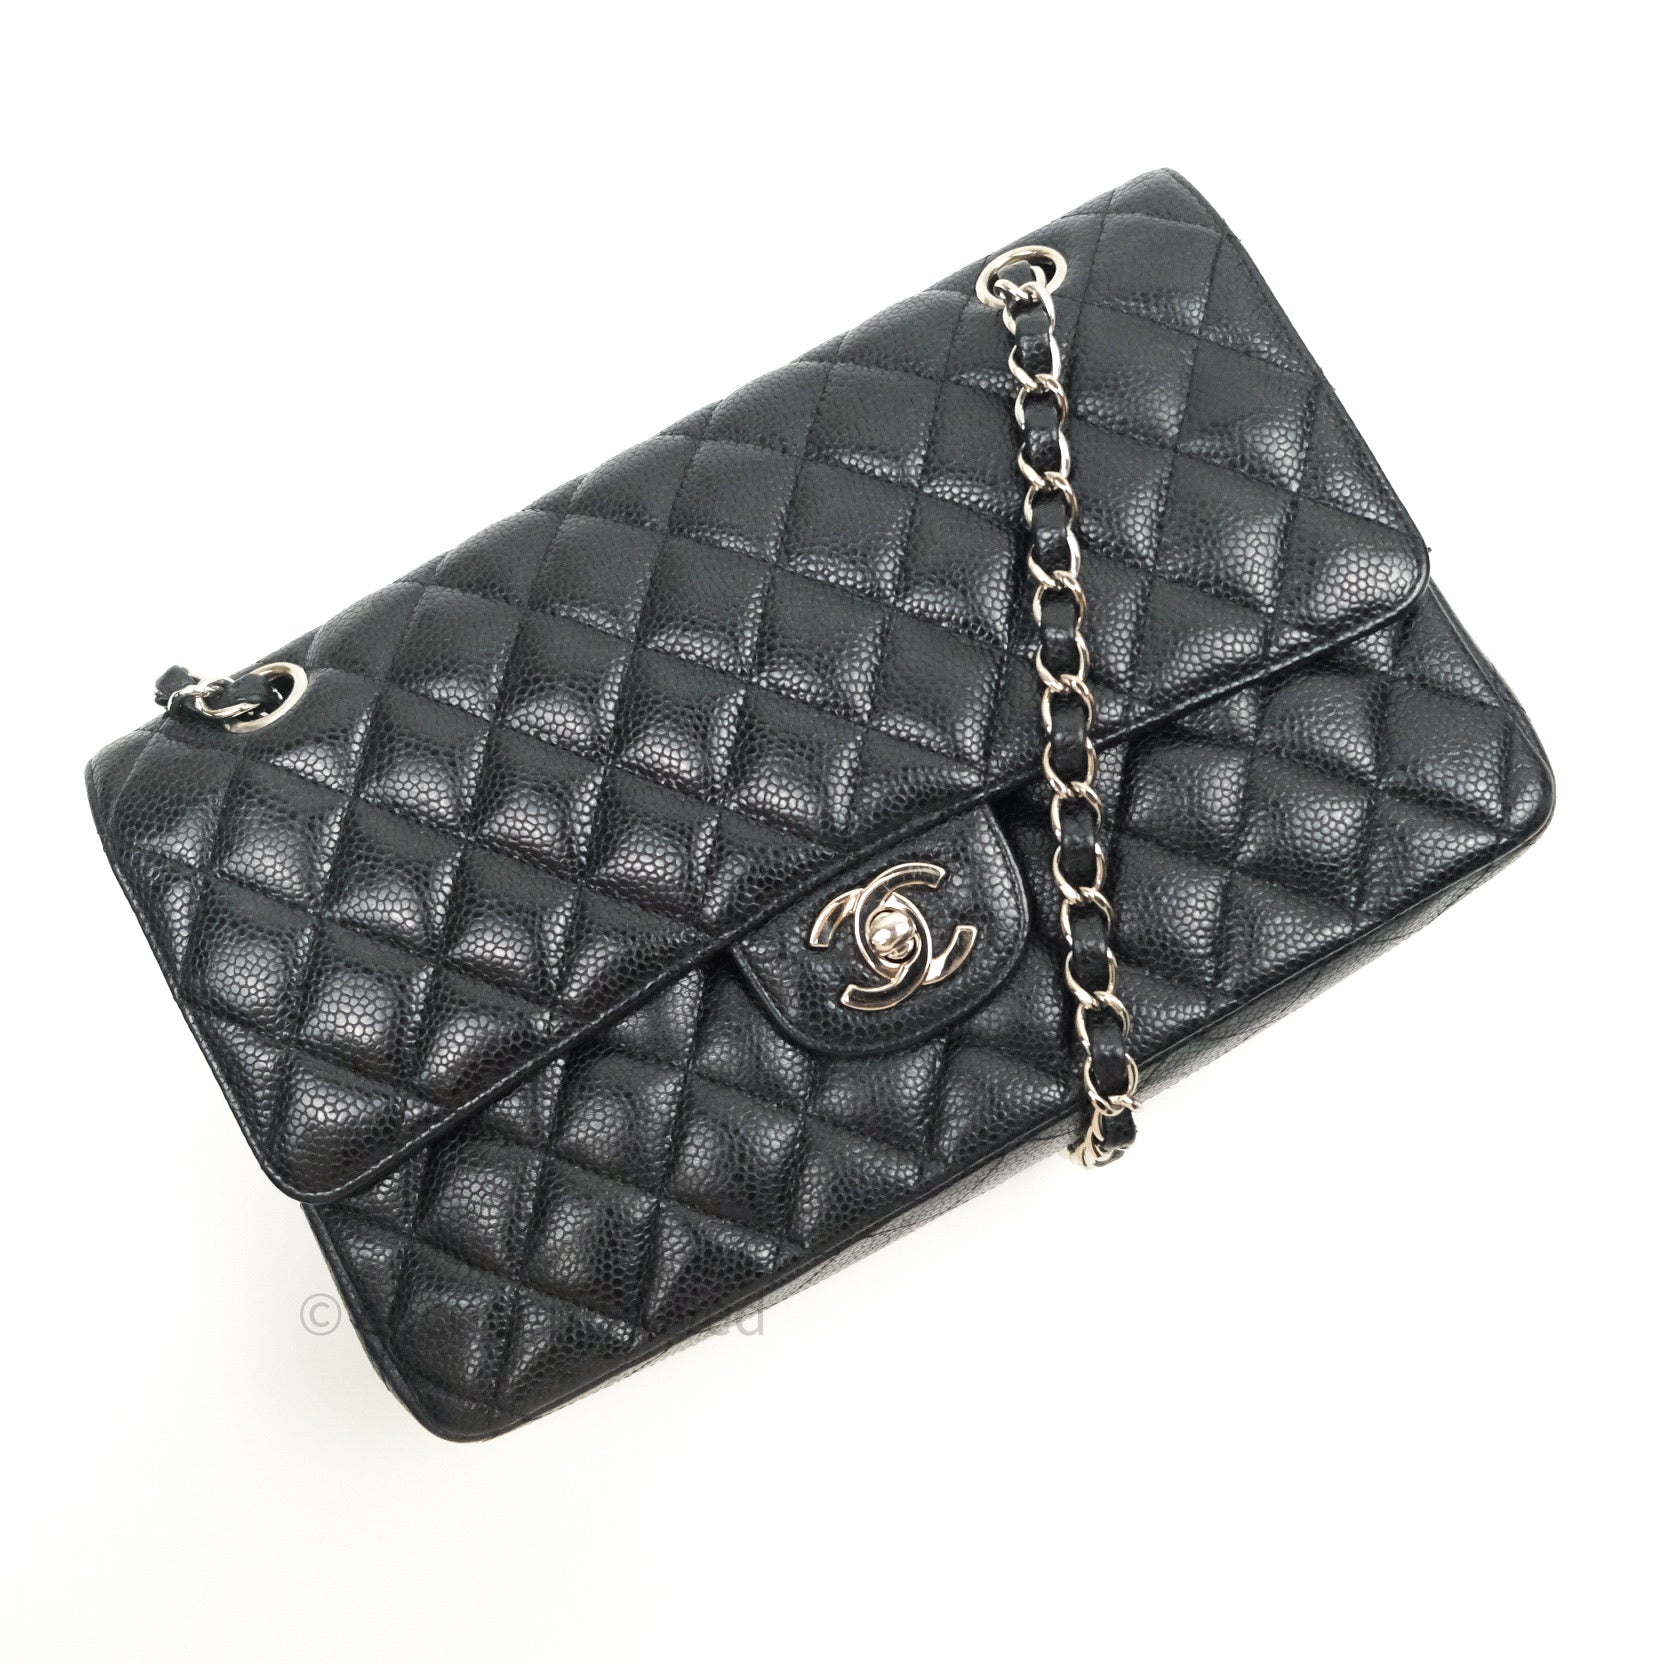 chanel black bag with silver hardware purse